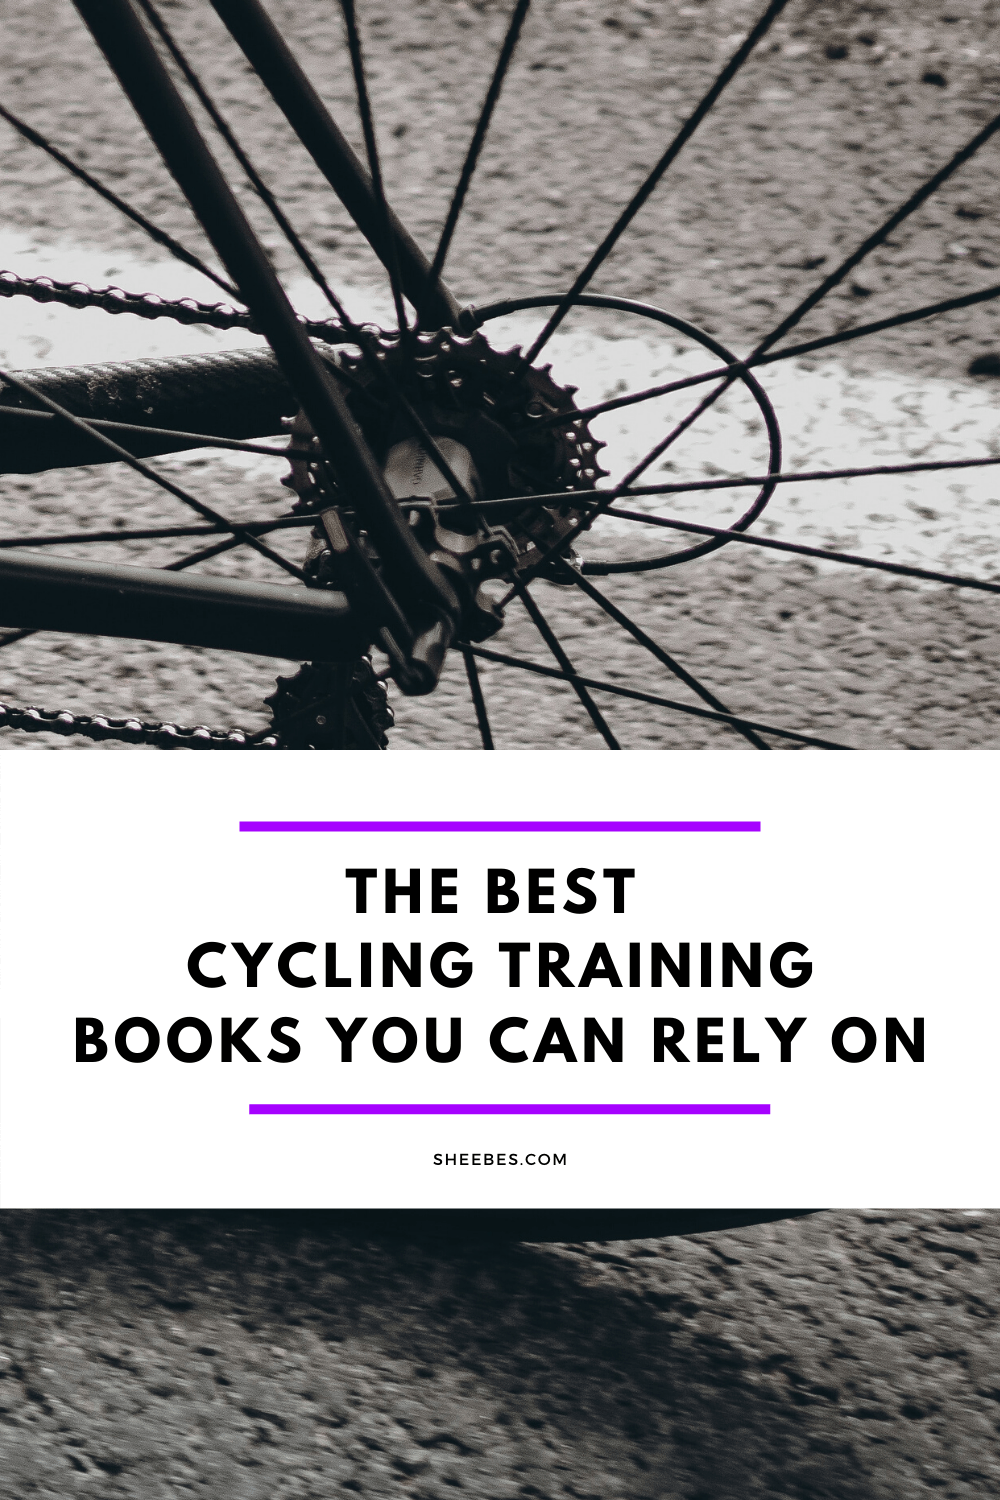 The best cycling training books you can rely on SHEEBES